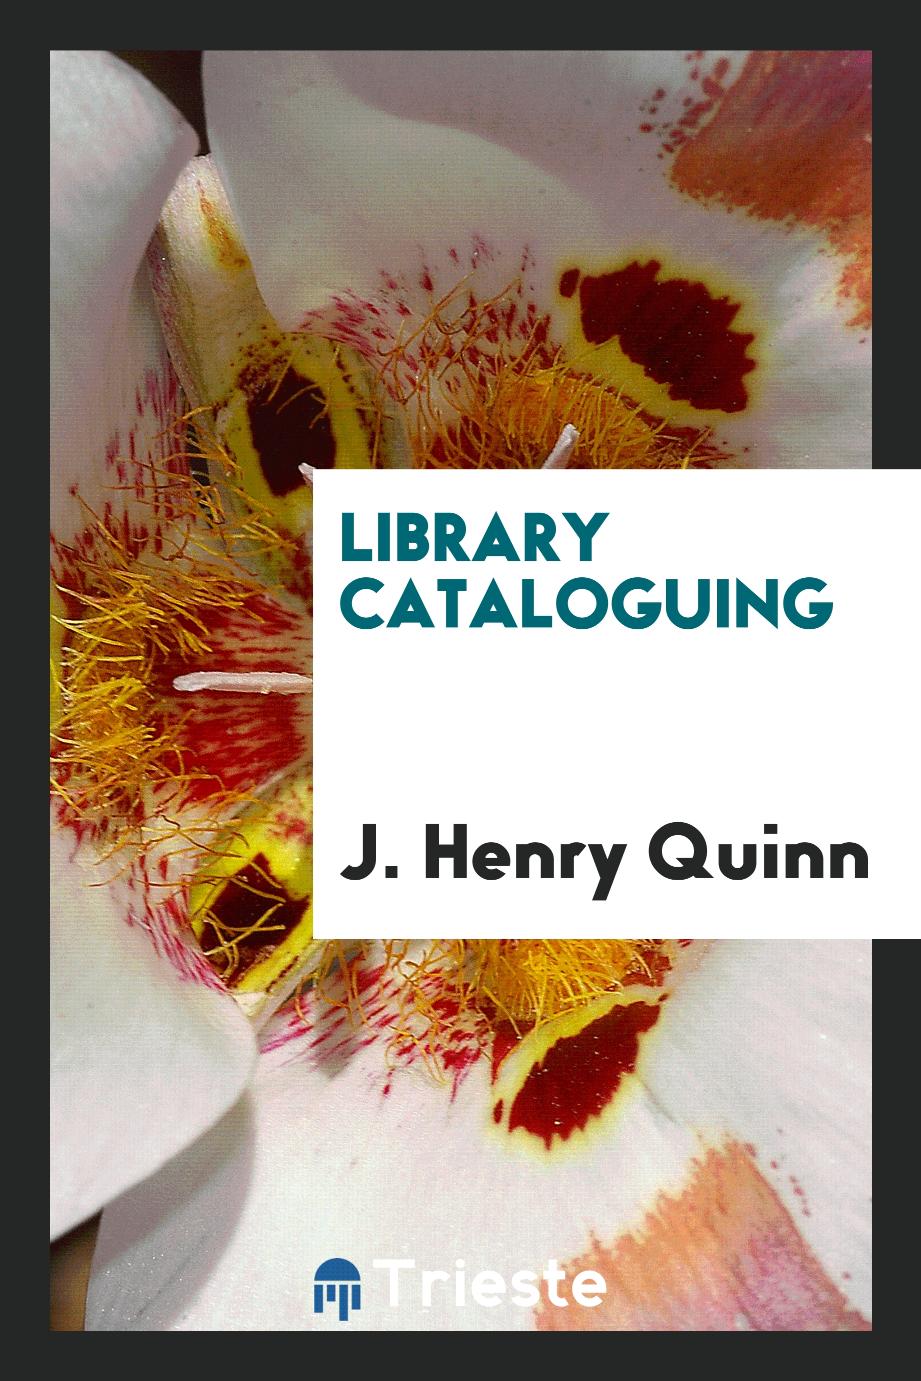 Library cataloguing